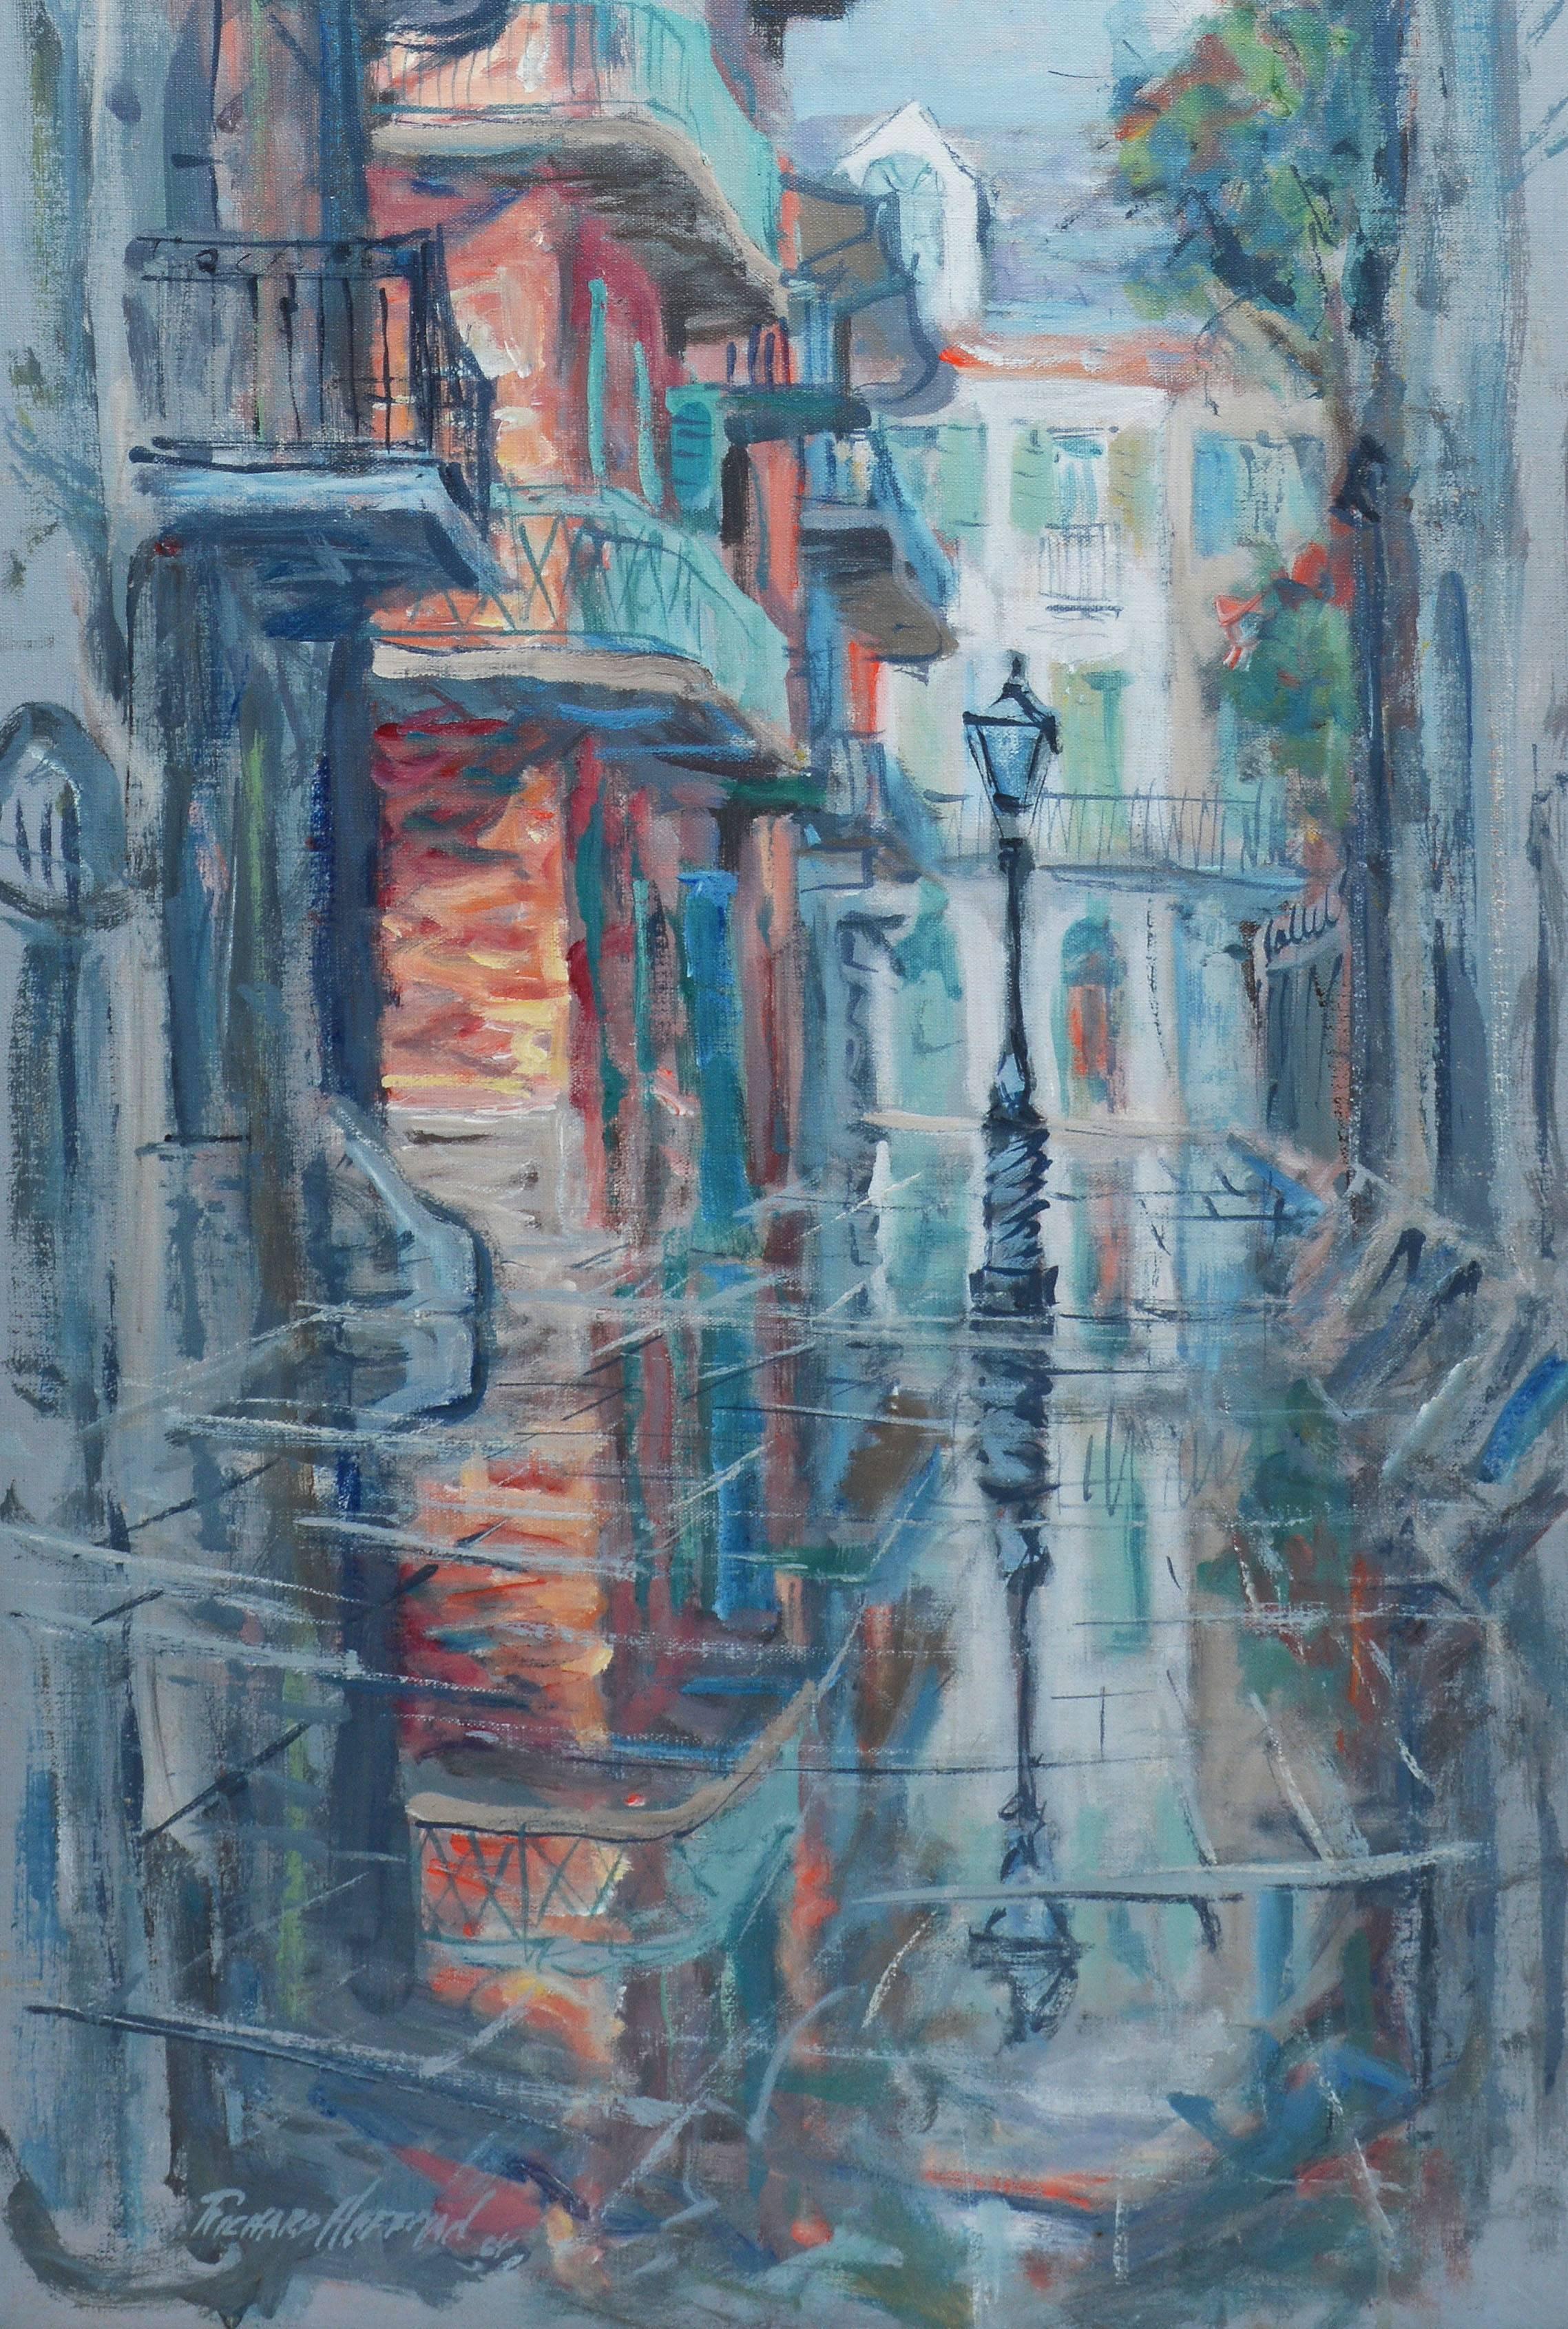 Impressionist cityscape of the French Quarter in New Orleans by Richard Hoffman.  Oil on canvas, circa 1964.  Signed lower left, "Richard Hoffman".  Displayed in a period giltwood frame.  Image size, 16"L x 36"H, overall